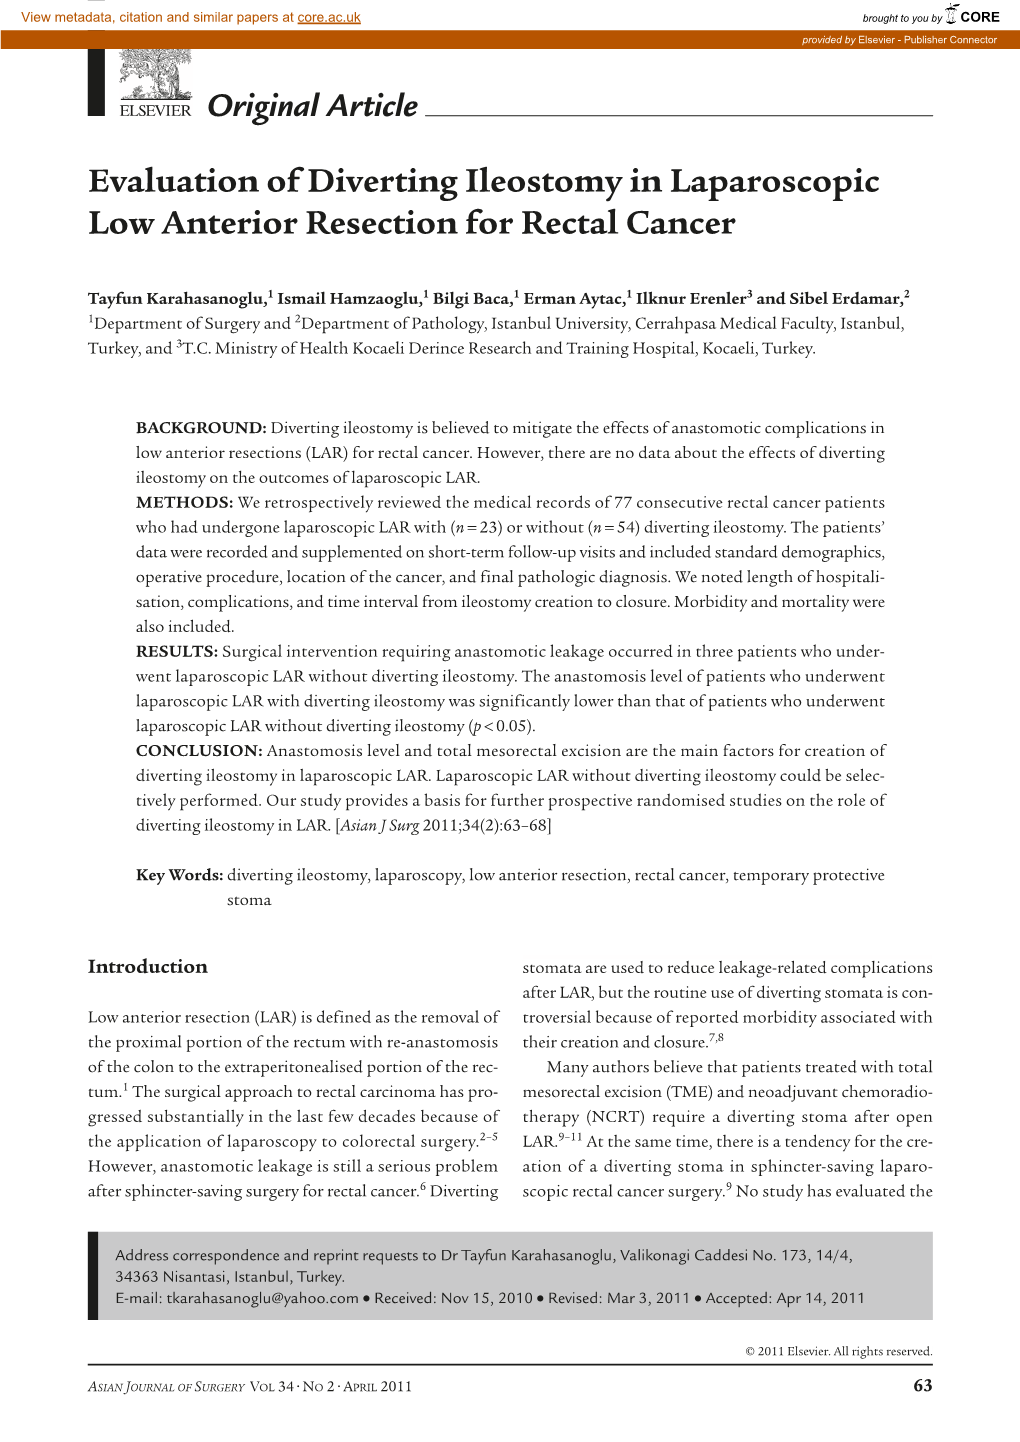 Evaluation of Diverting Ileostomy in Laparoscopic Low Anterior Resection for Rectal Cancer